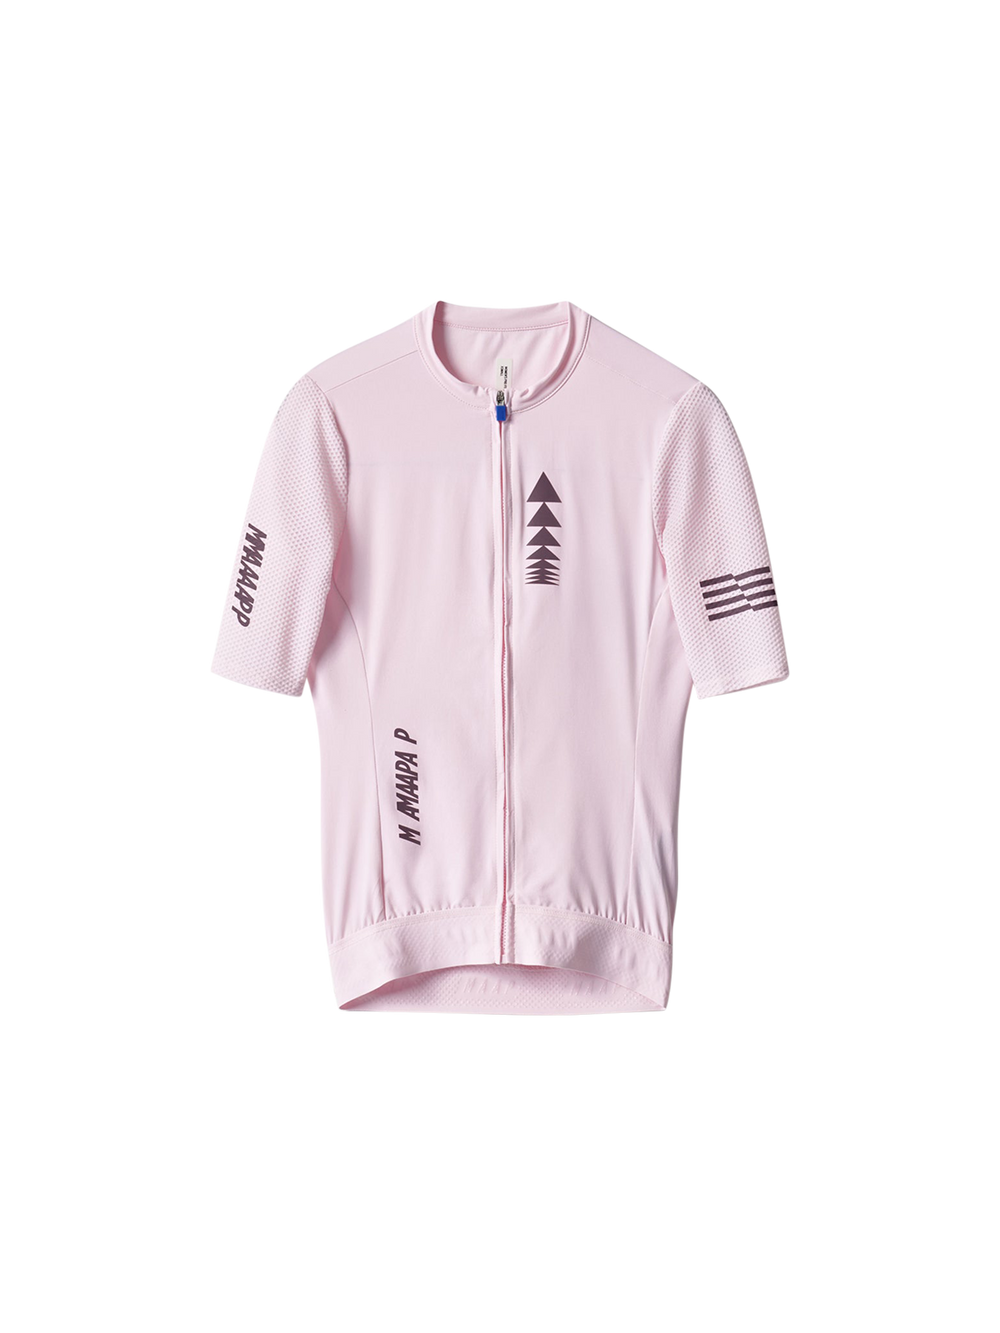 Product Image for Women's Shift Pro Base Jersey